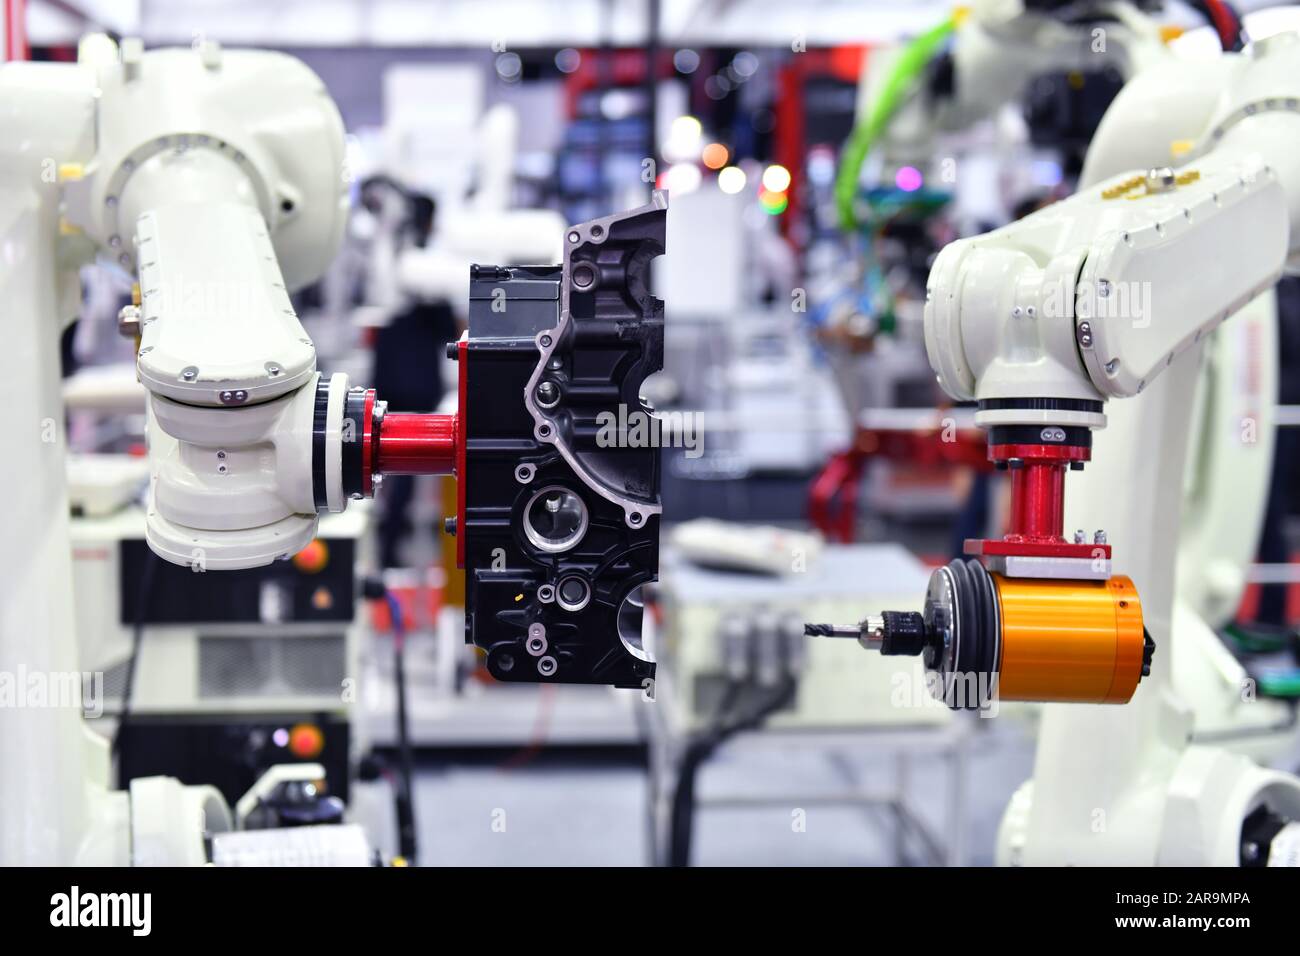 Modern robotic machine vision system in factory, Industry Robot concept . Stock Photo